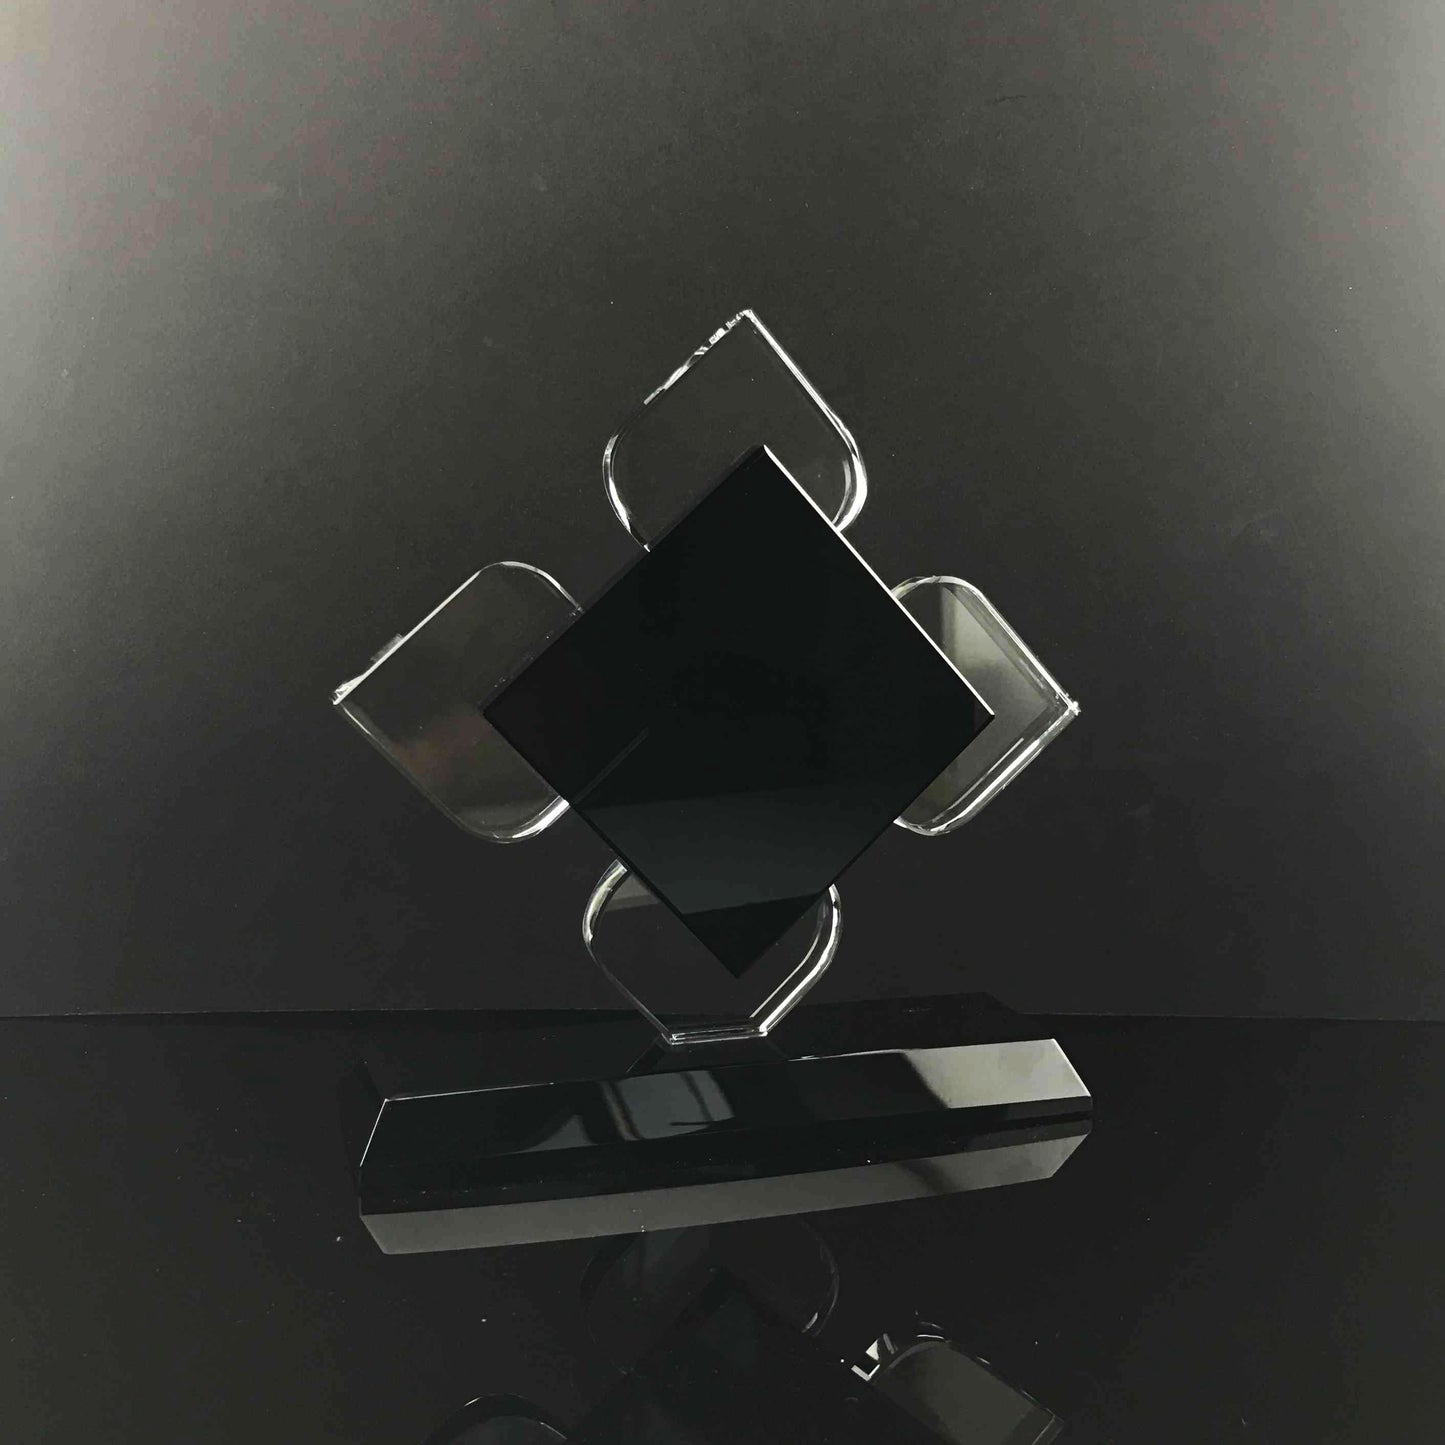 Multi-Faceted Diamond Crystal Trophy Award with Black Base